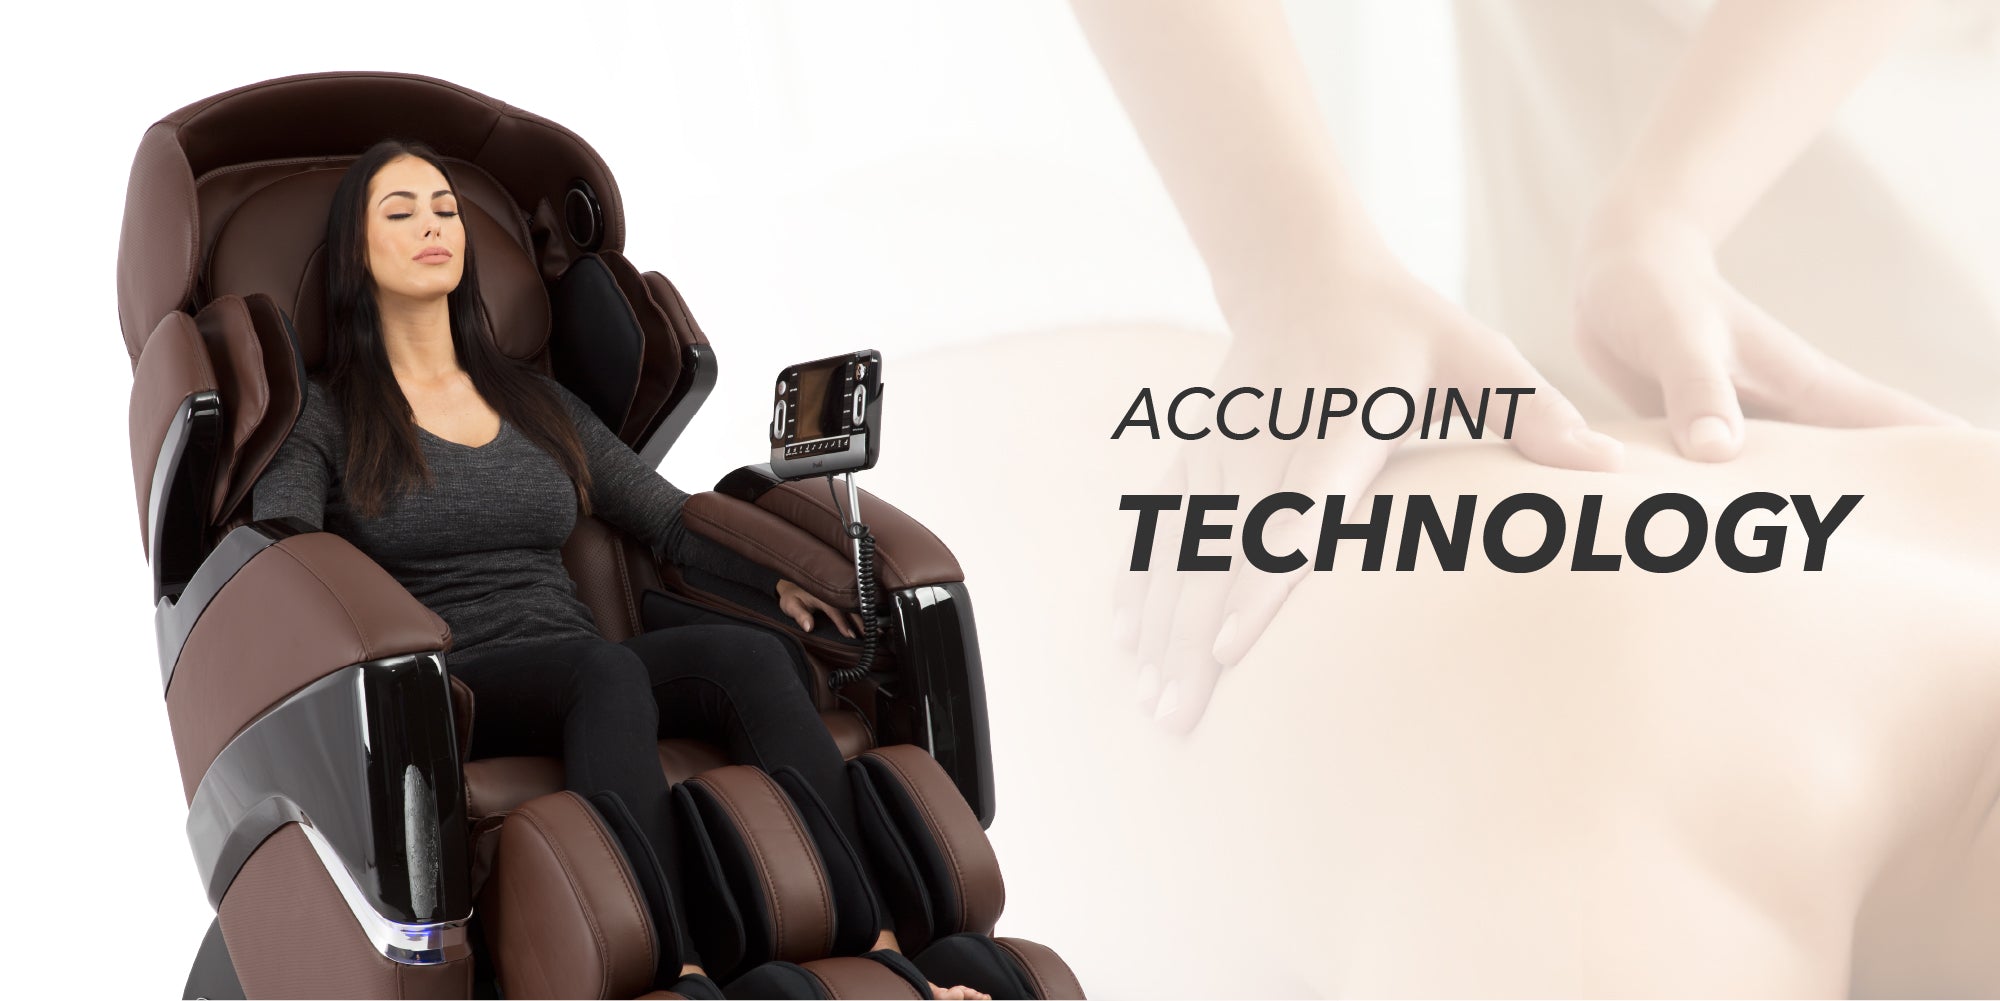 Accupoint Technology